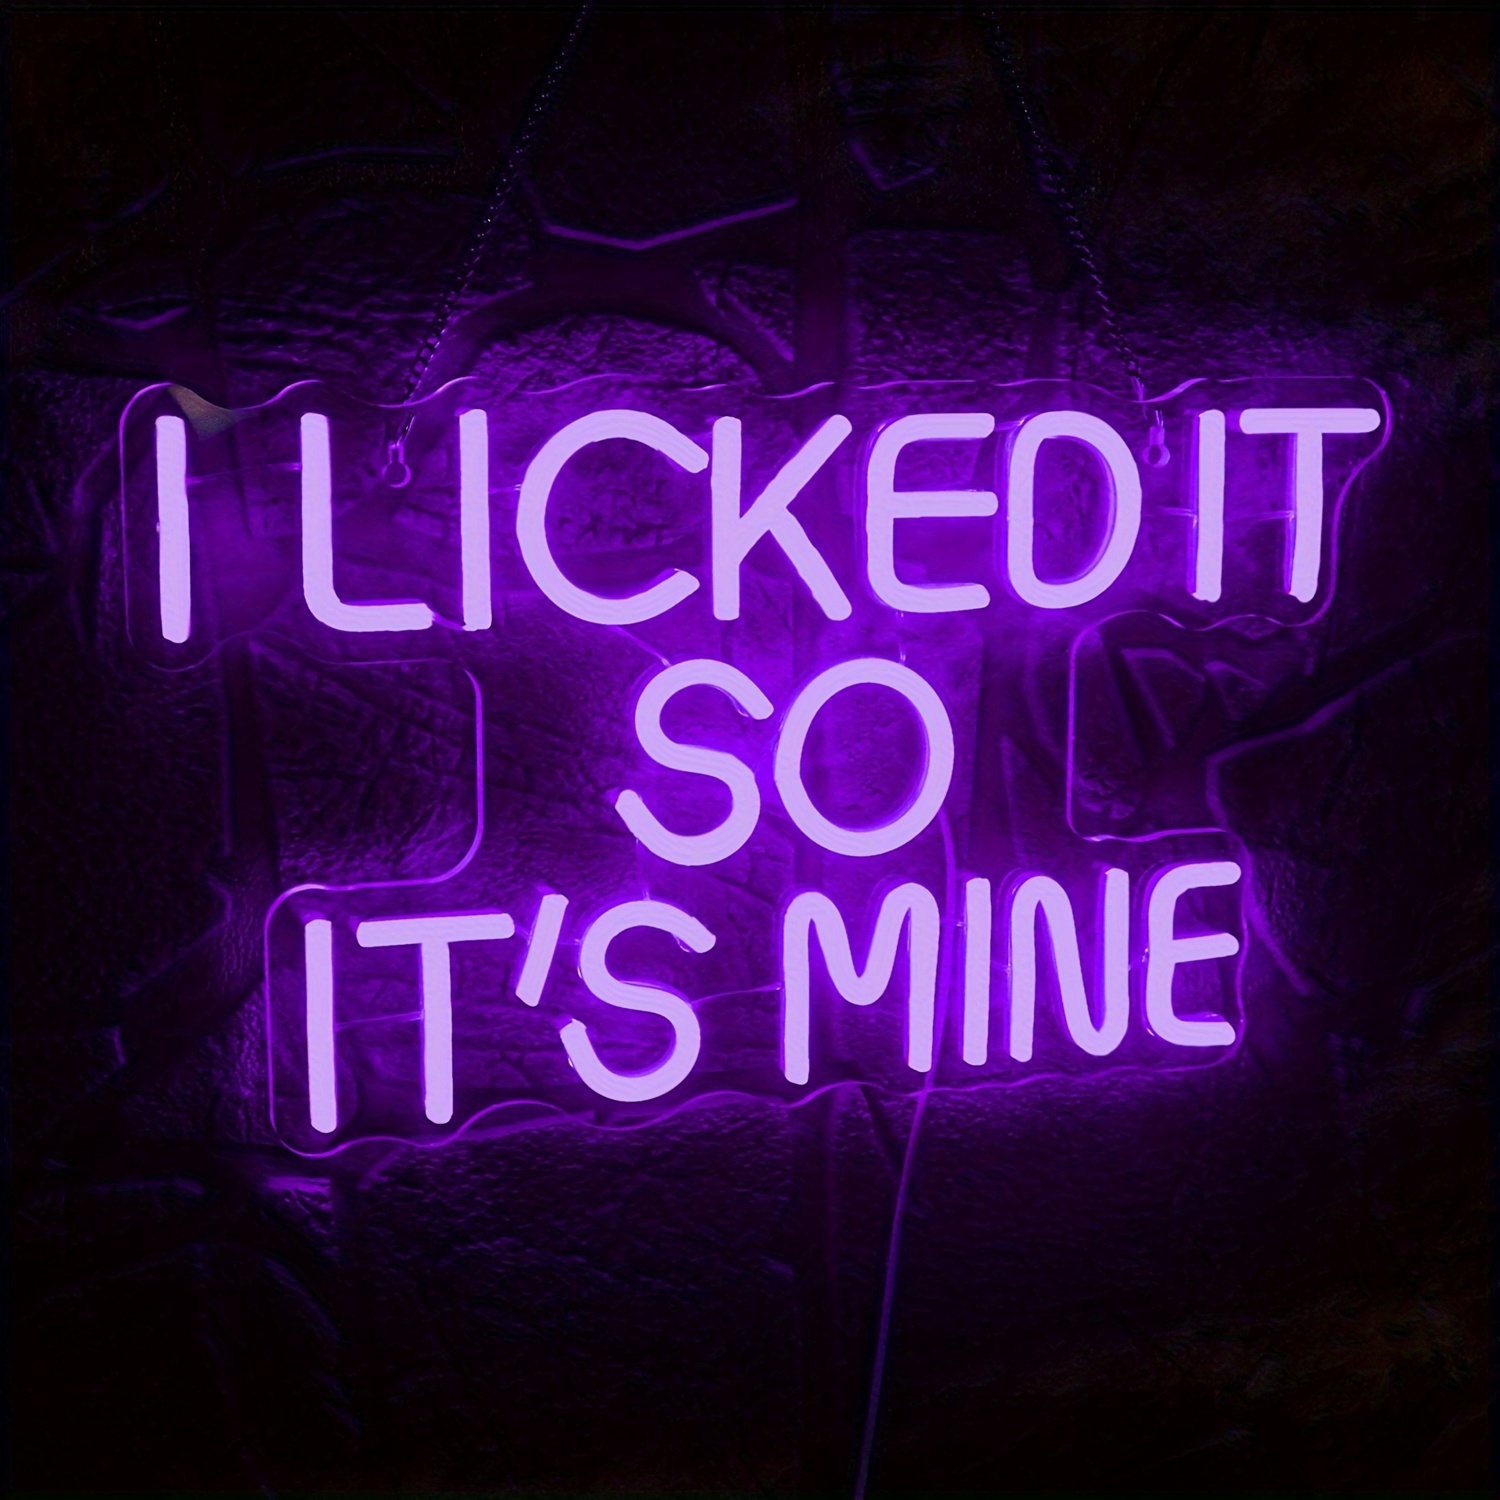 Custom Made Neon Signs, I Licked it So it's Mine Neon Sign, LED